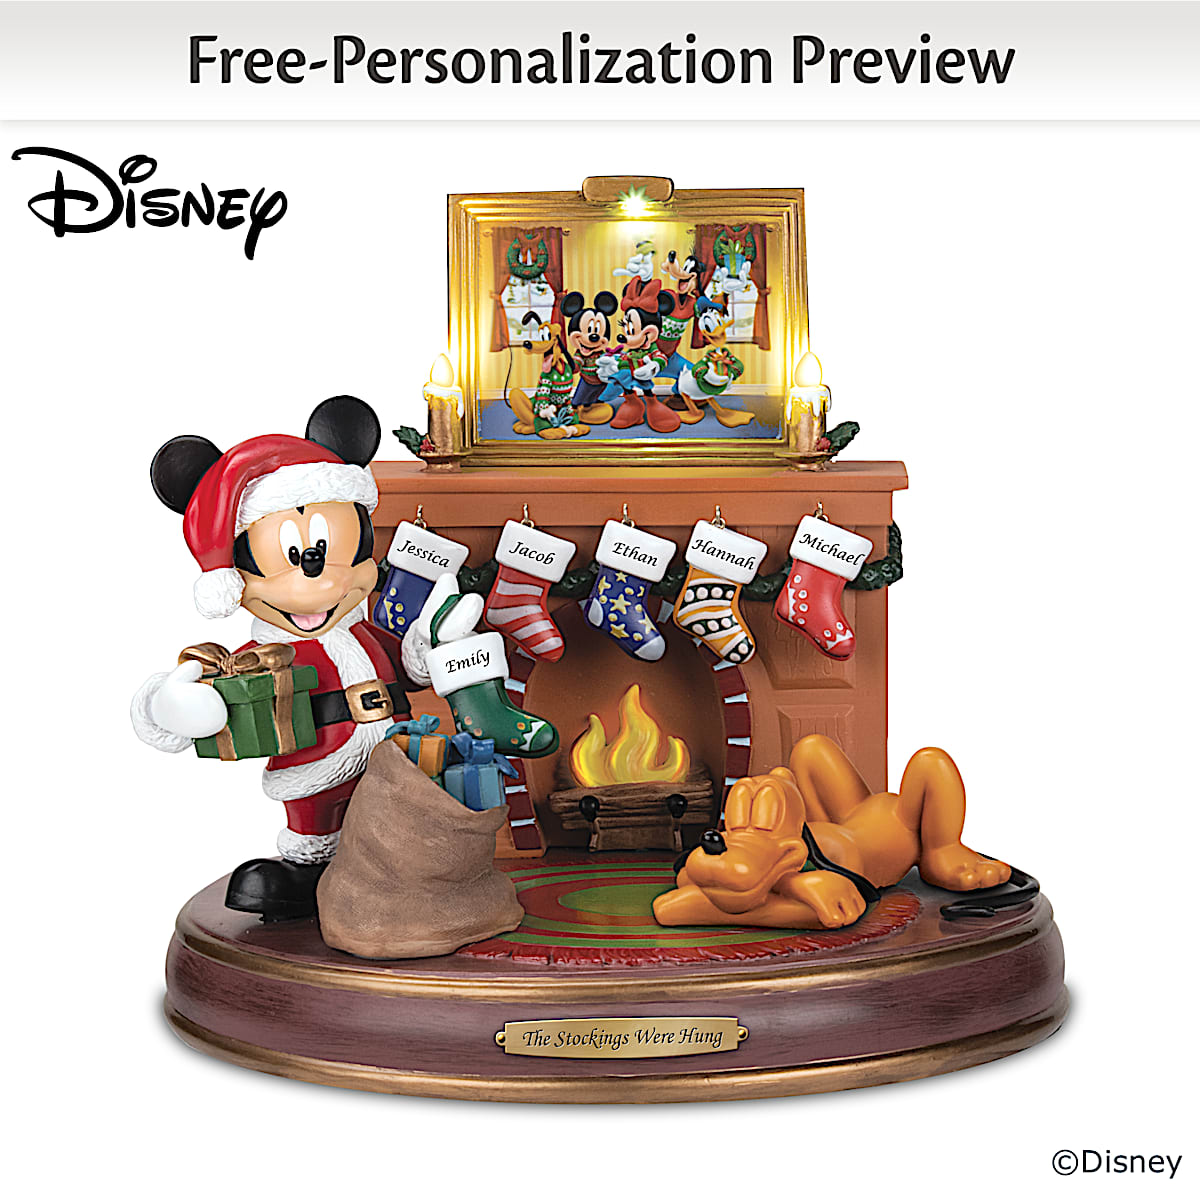 The Disney The Stockings Were Hung...Musical Personalized Sculpture